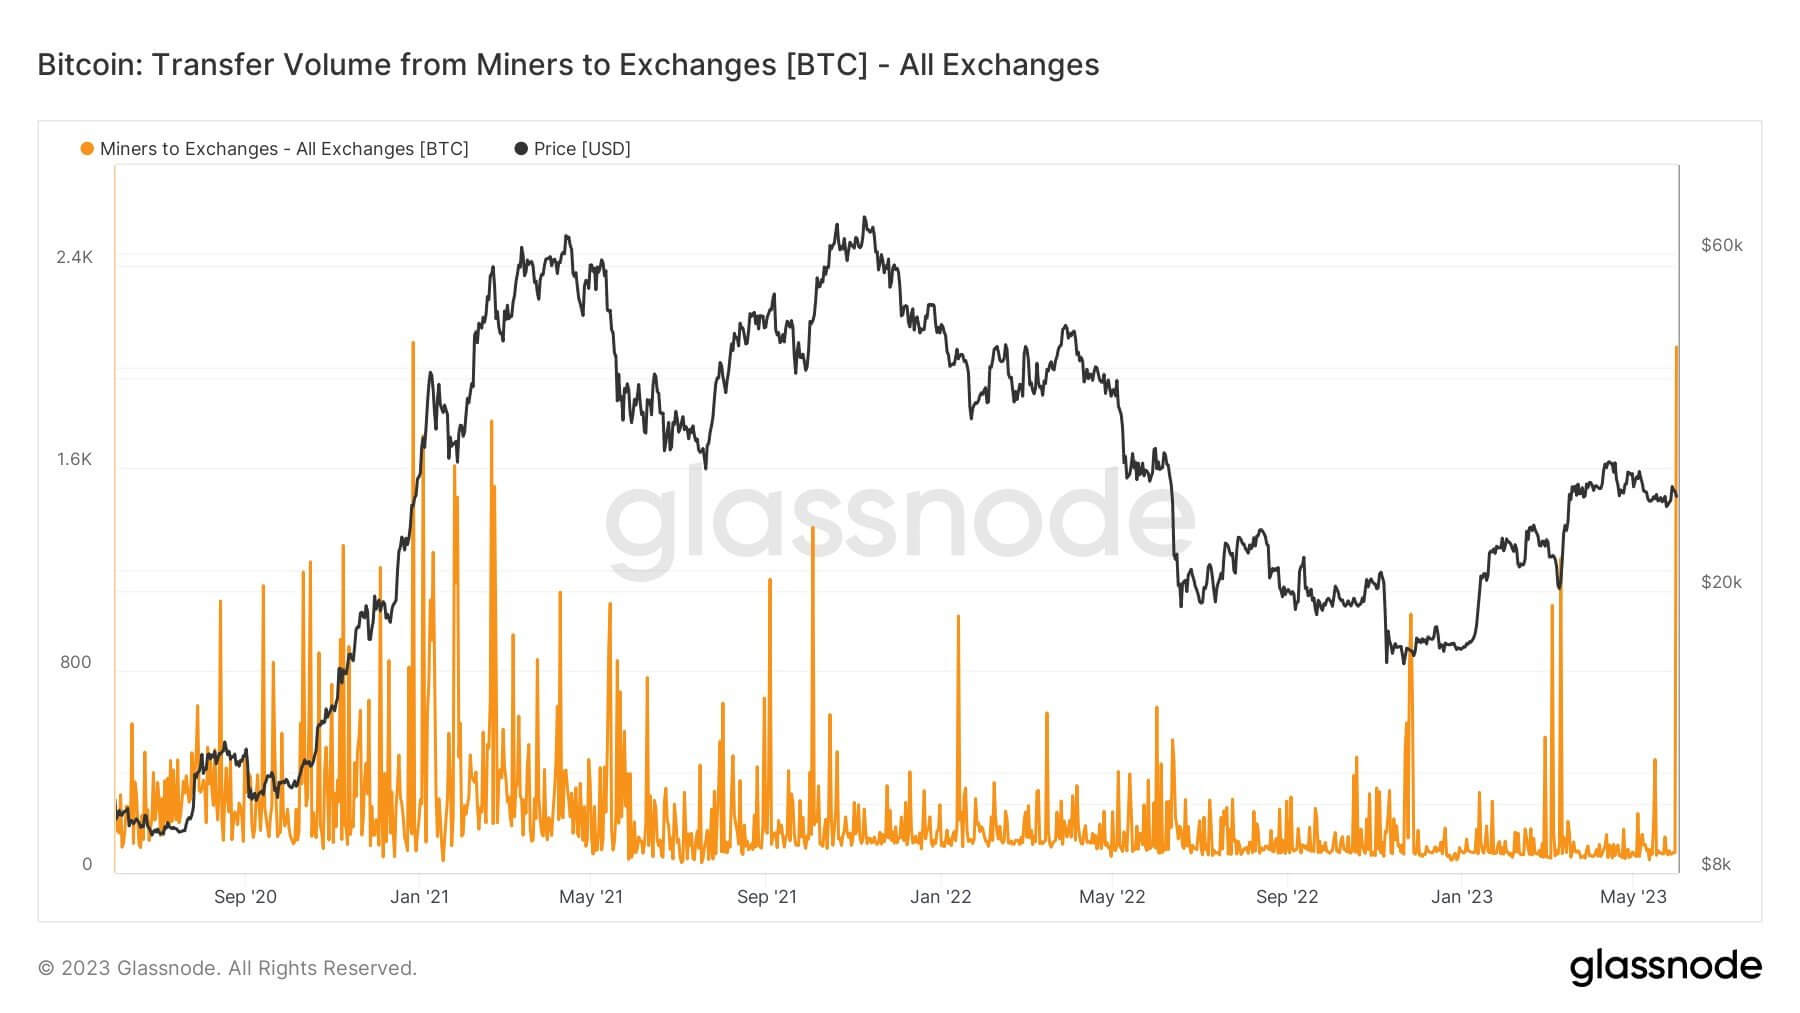 Yesterday saw the largest one-day Bitcoin transfer from miners to an exchange in two years